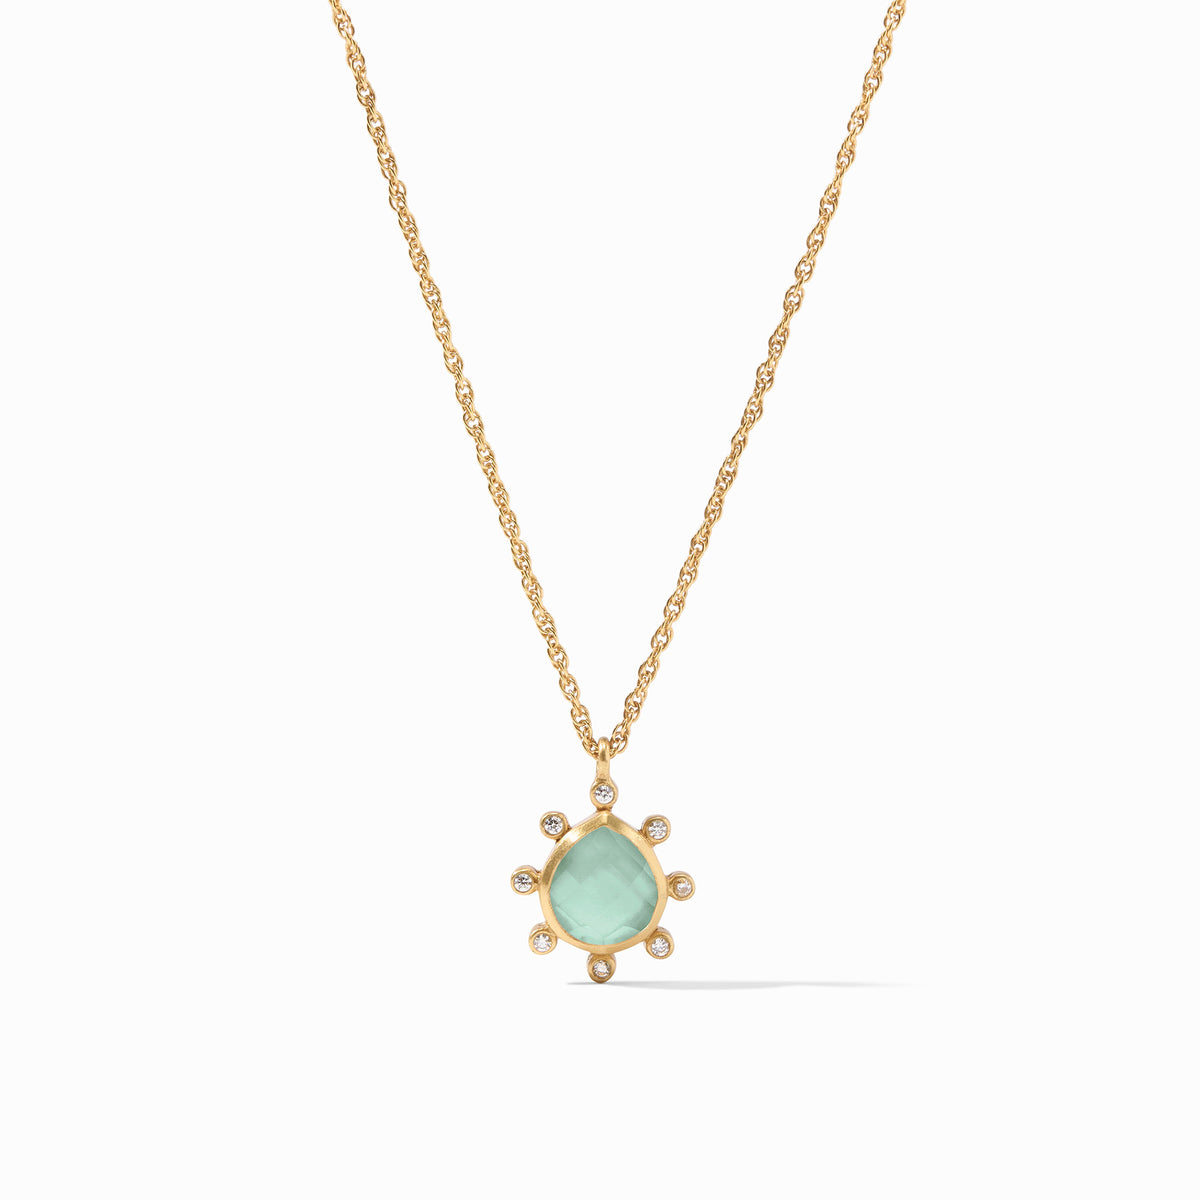 Clementine Pave Delicate Necklace